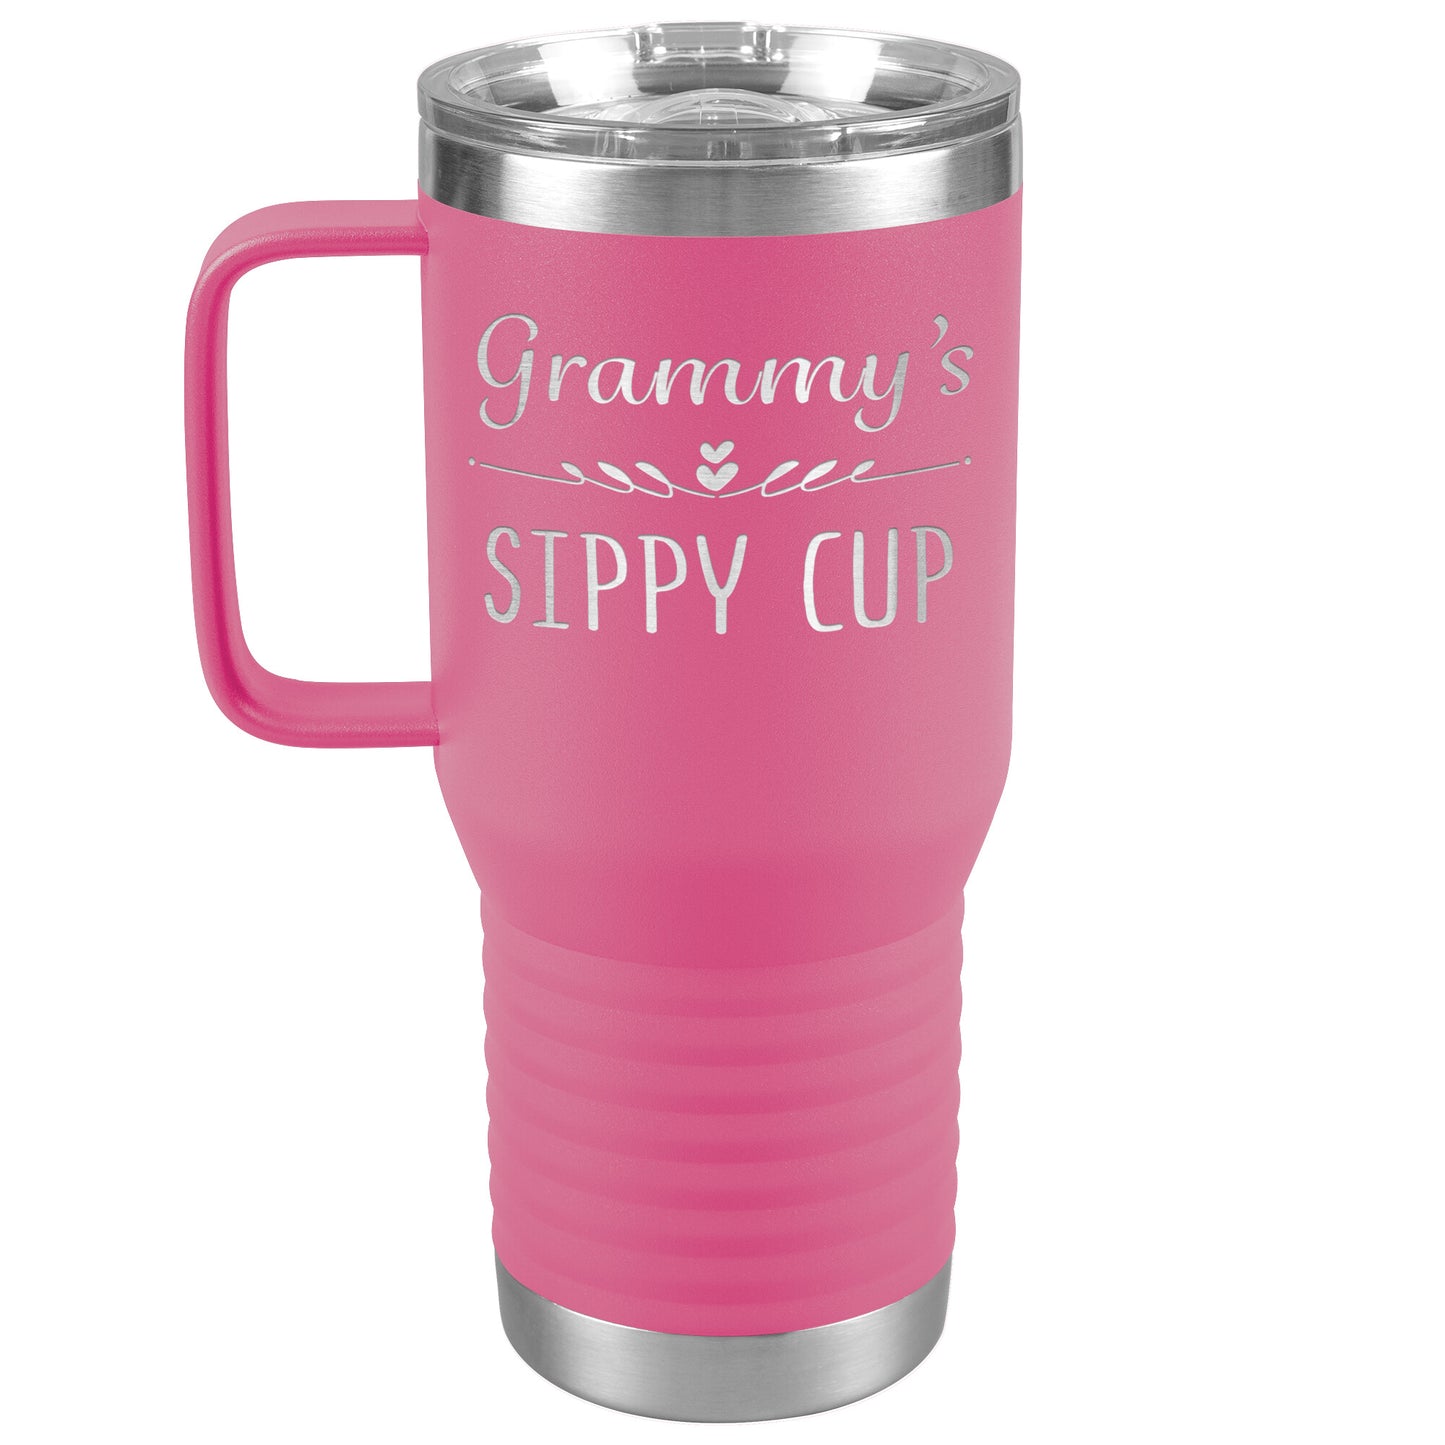 Grammy's Sippy Cup Tumbler